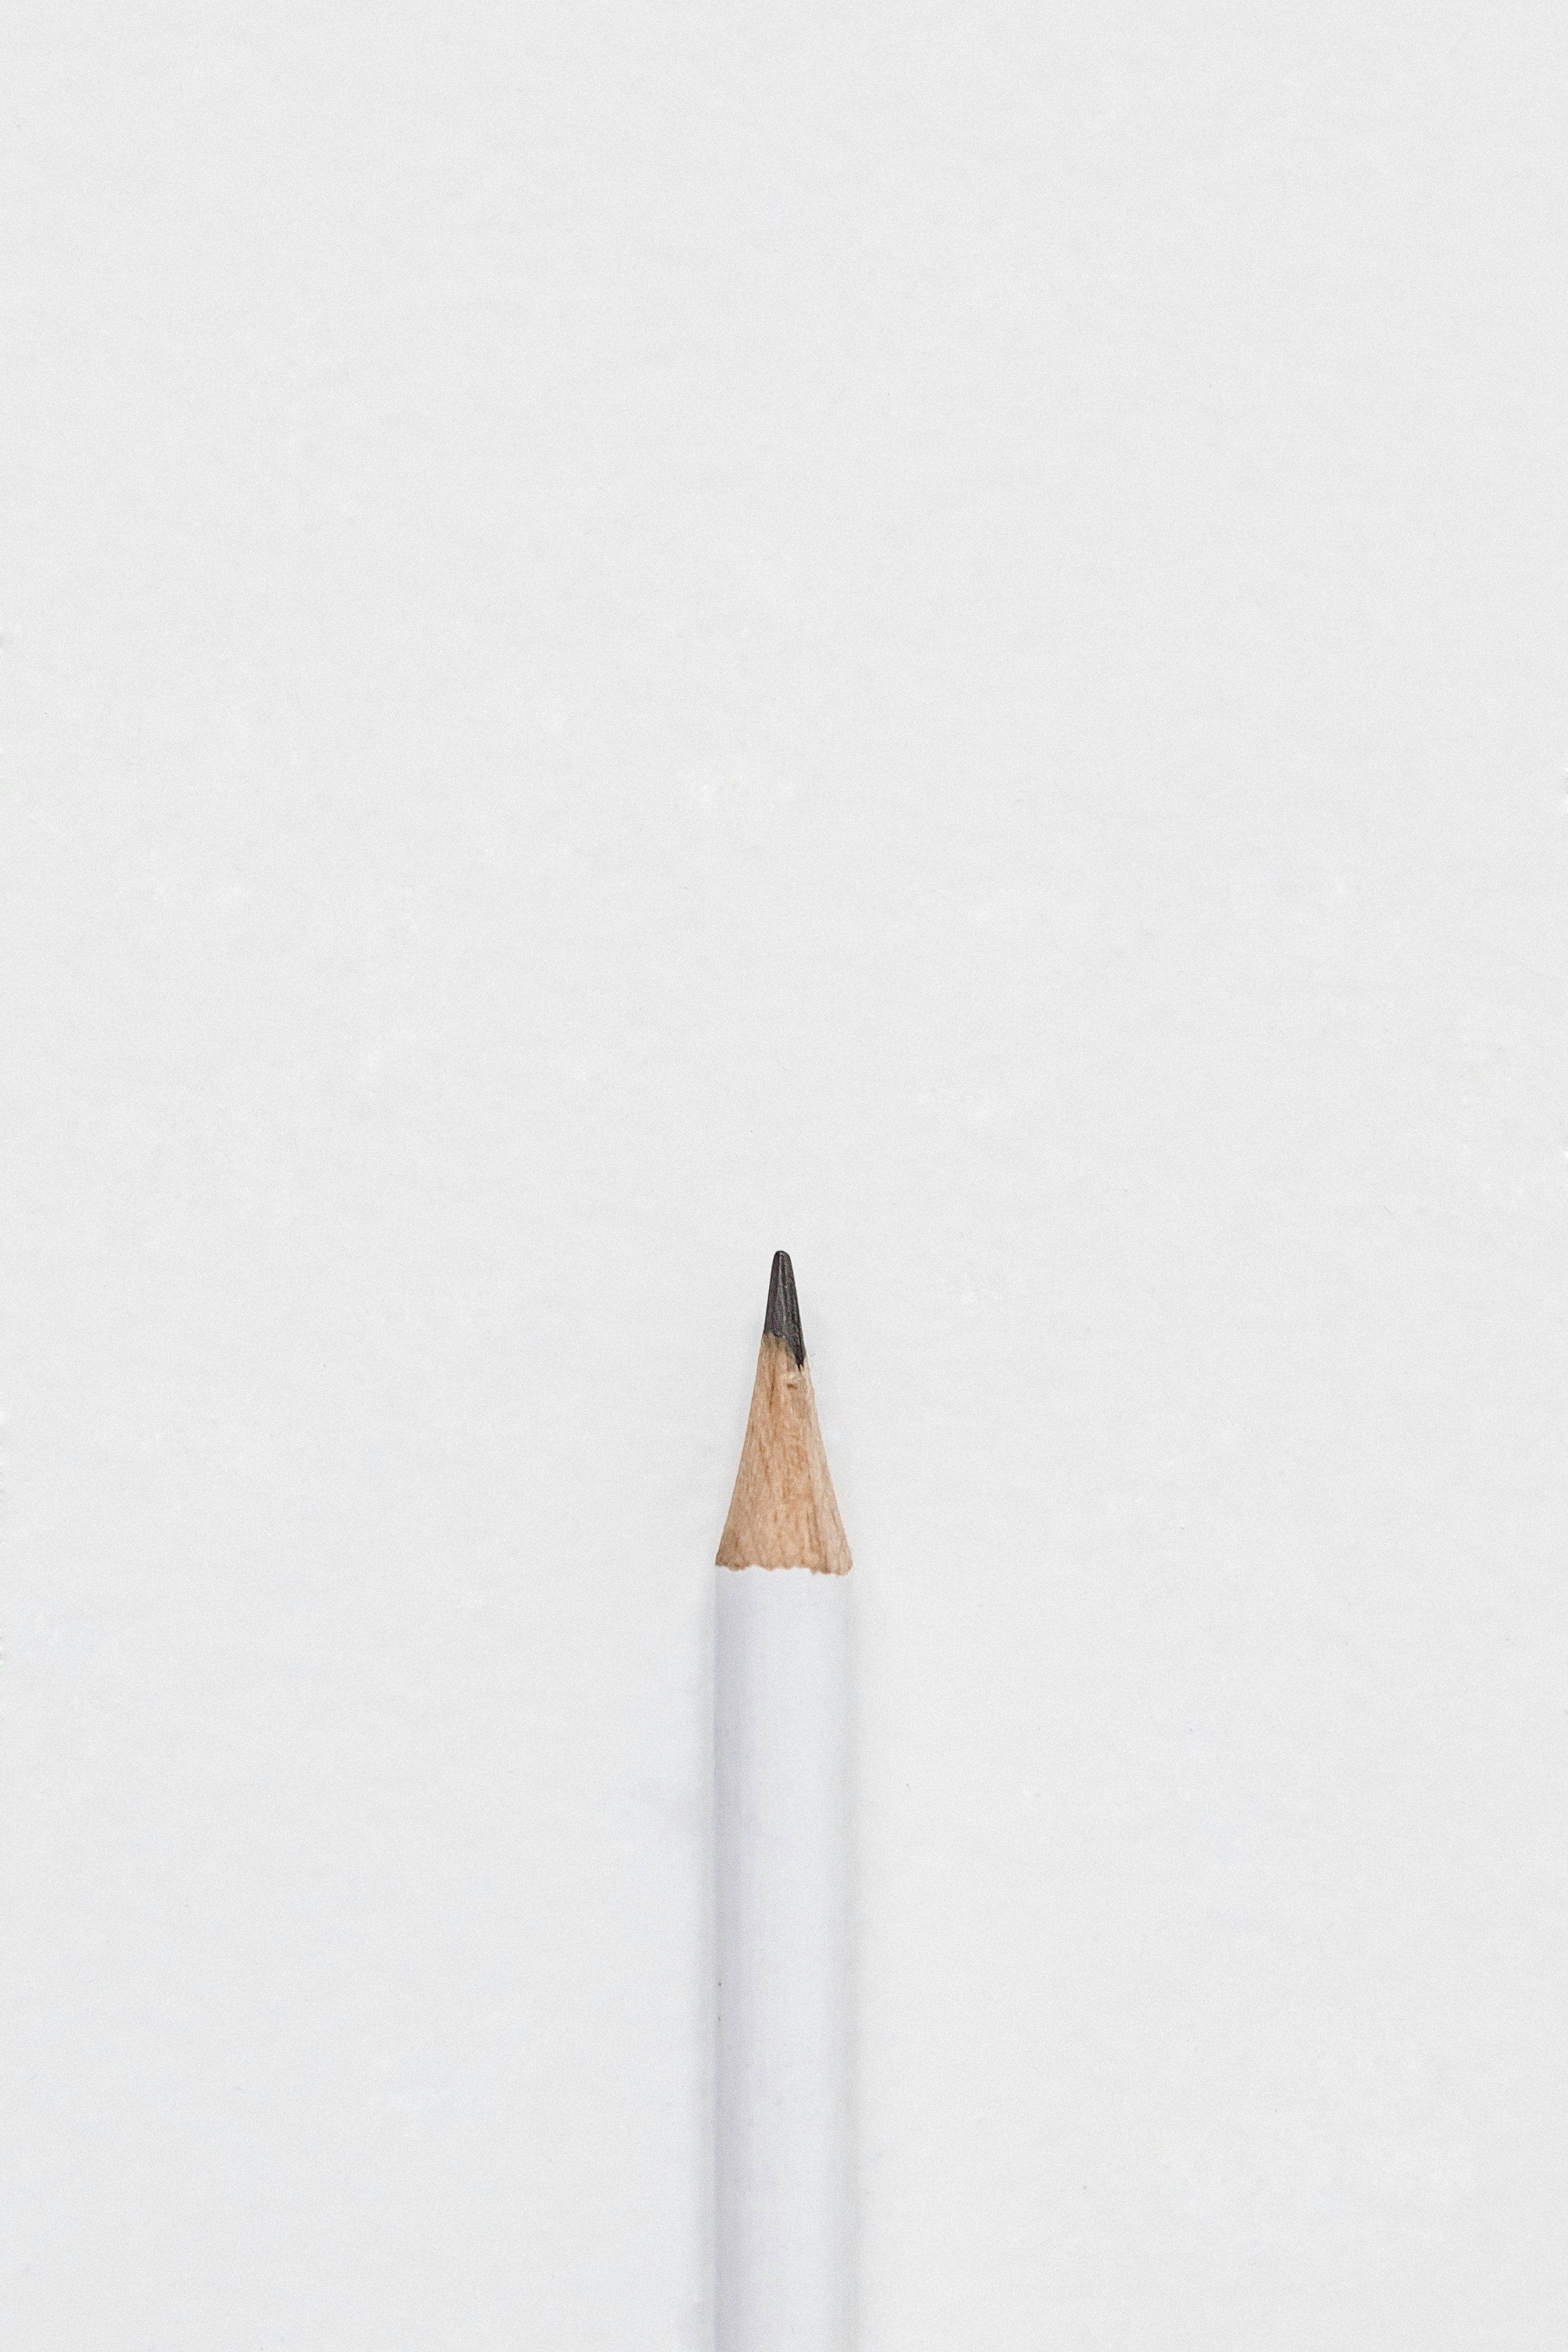 white lead pencil on surface